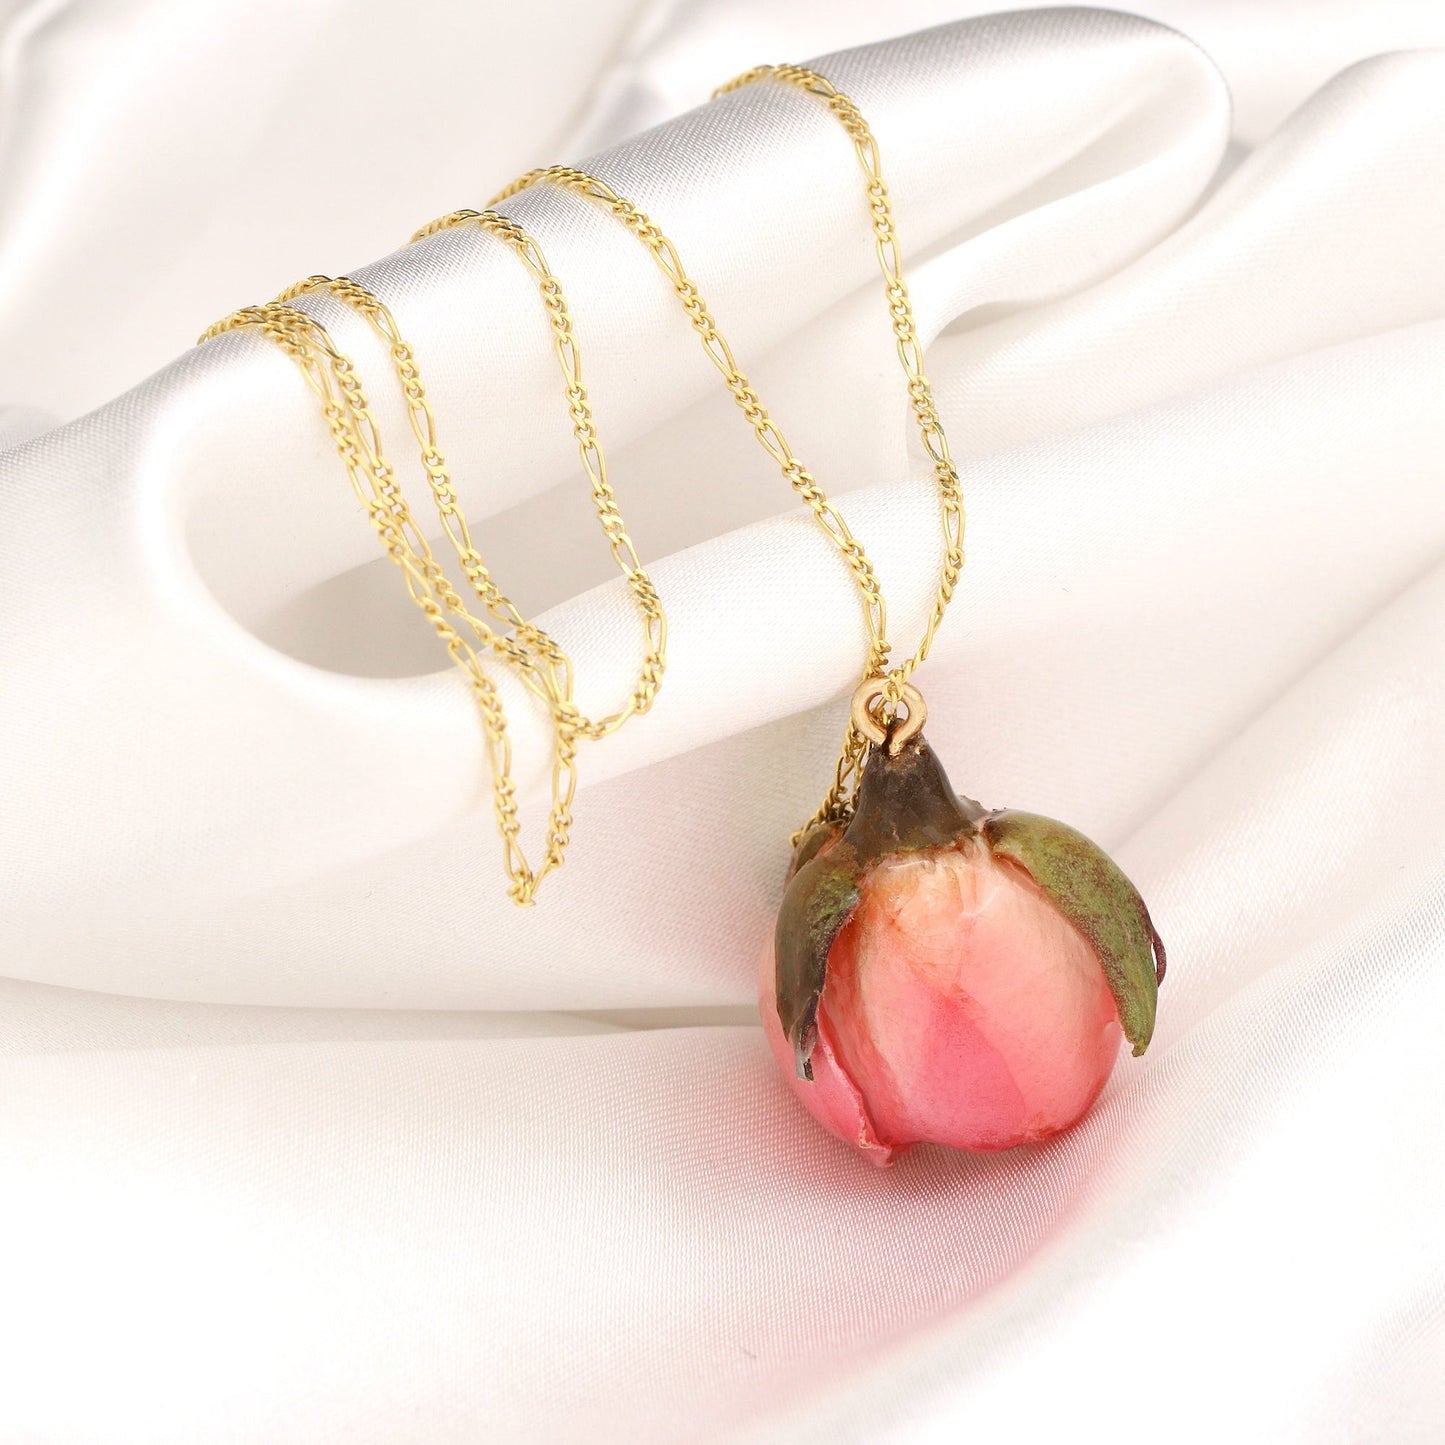 Real Rose Necklace - 925 Sterling Gold Plated Chain Poured with Resin - K925-58